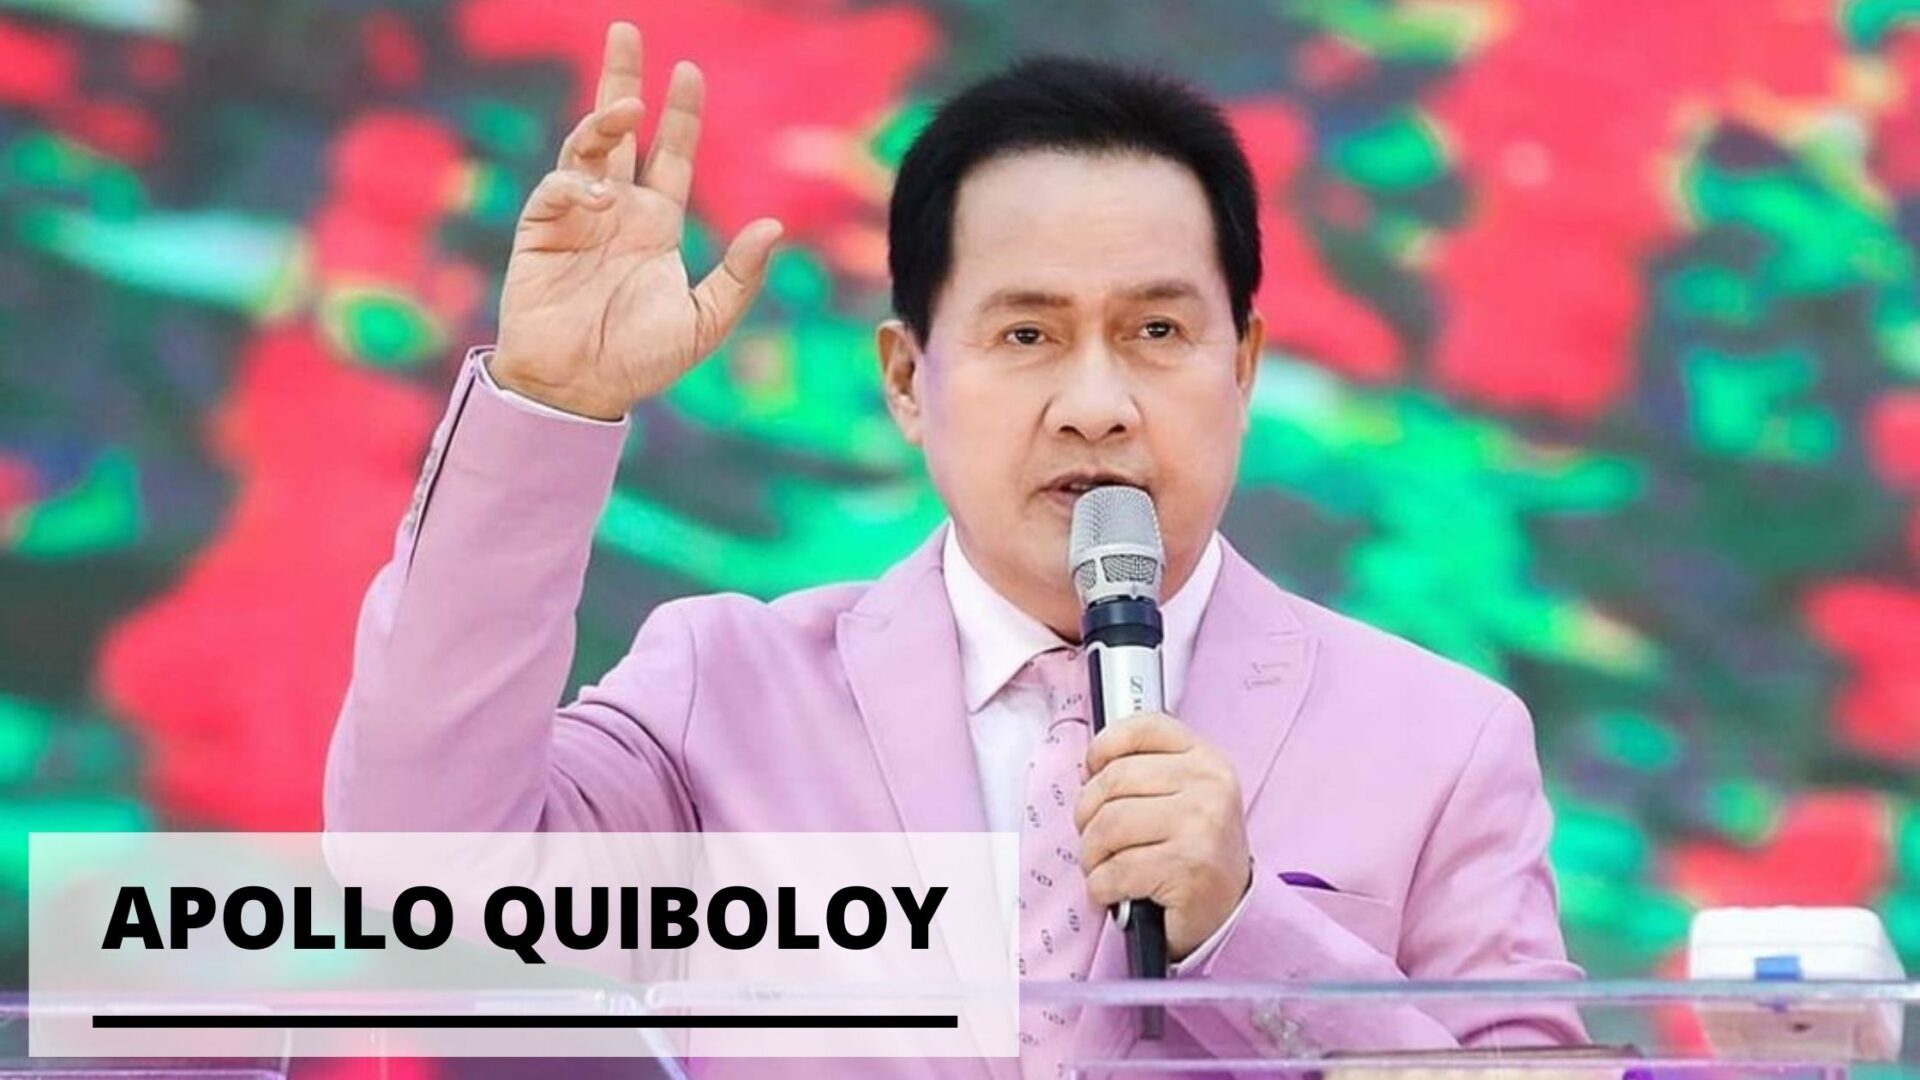 Does Apollo Quiboloy have a Wife?